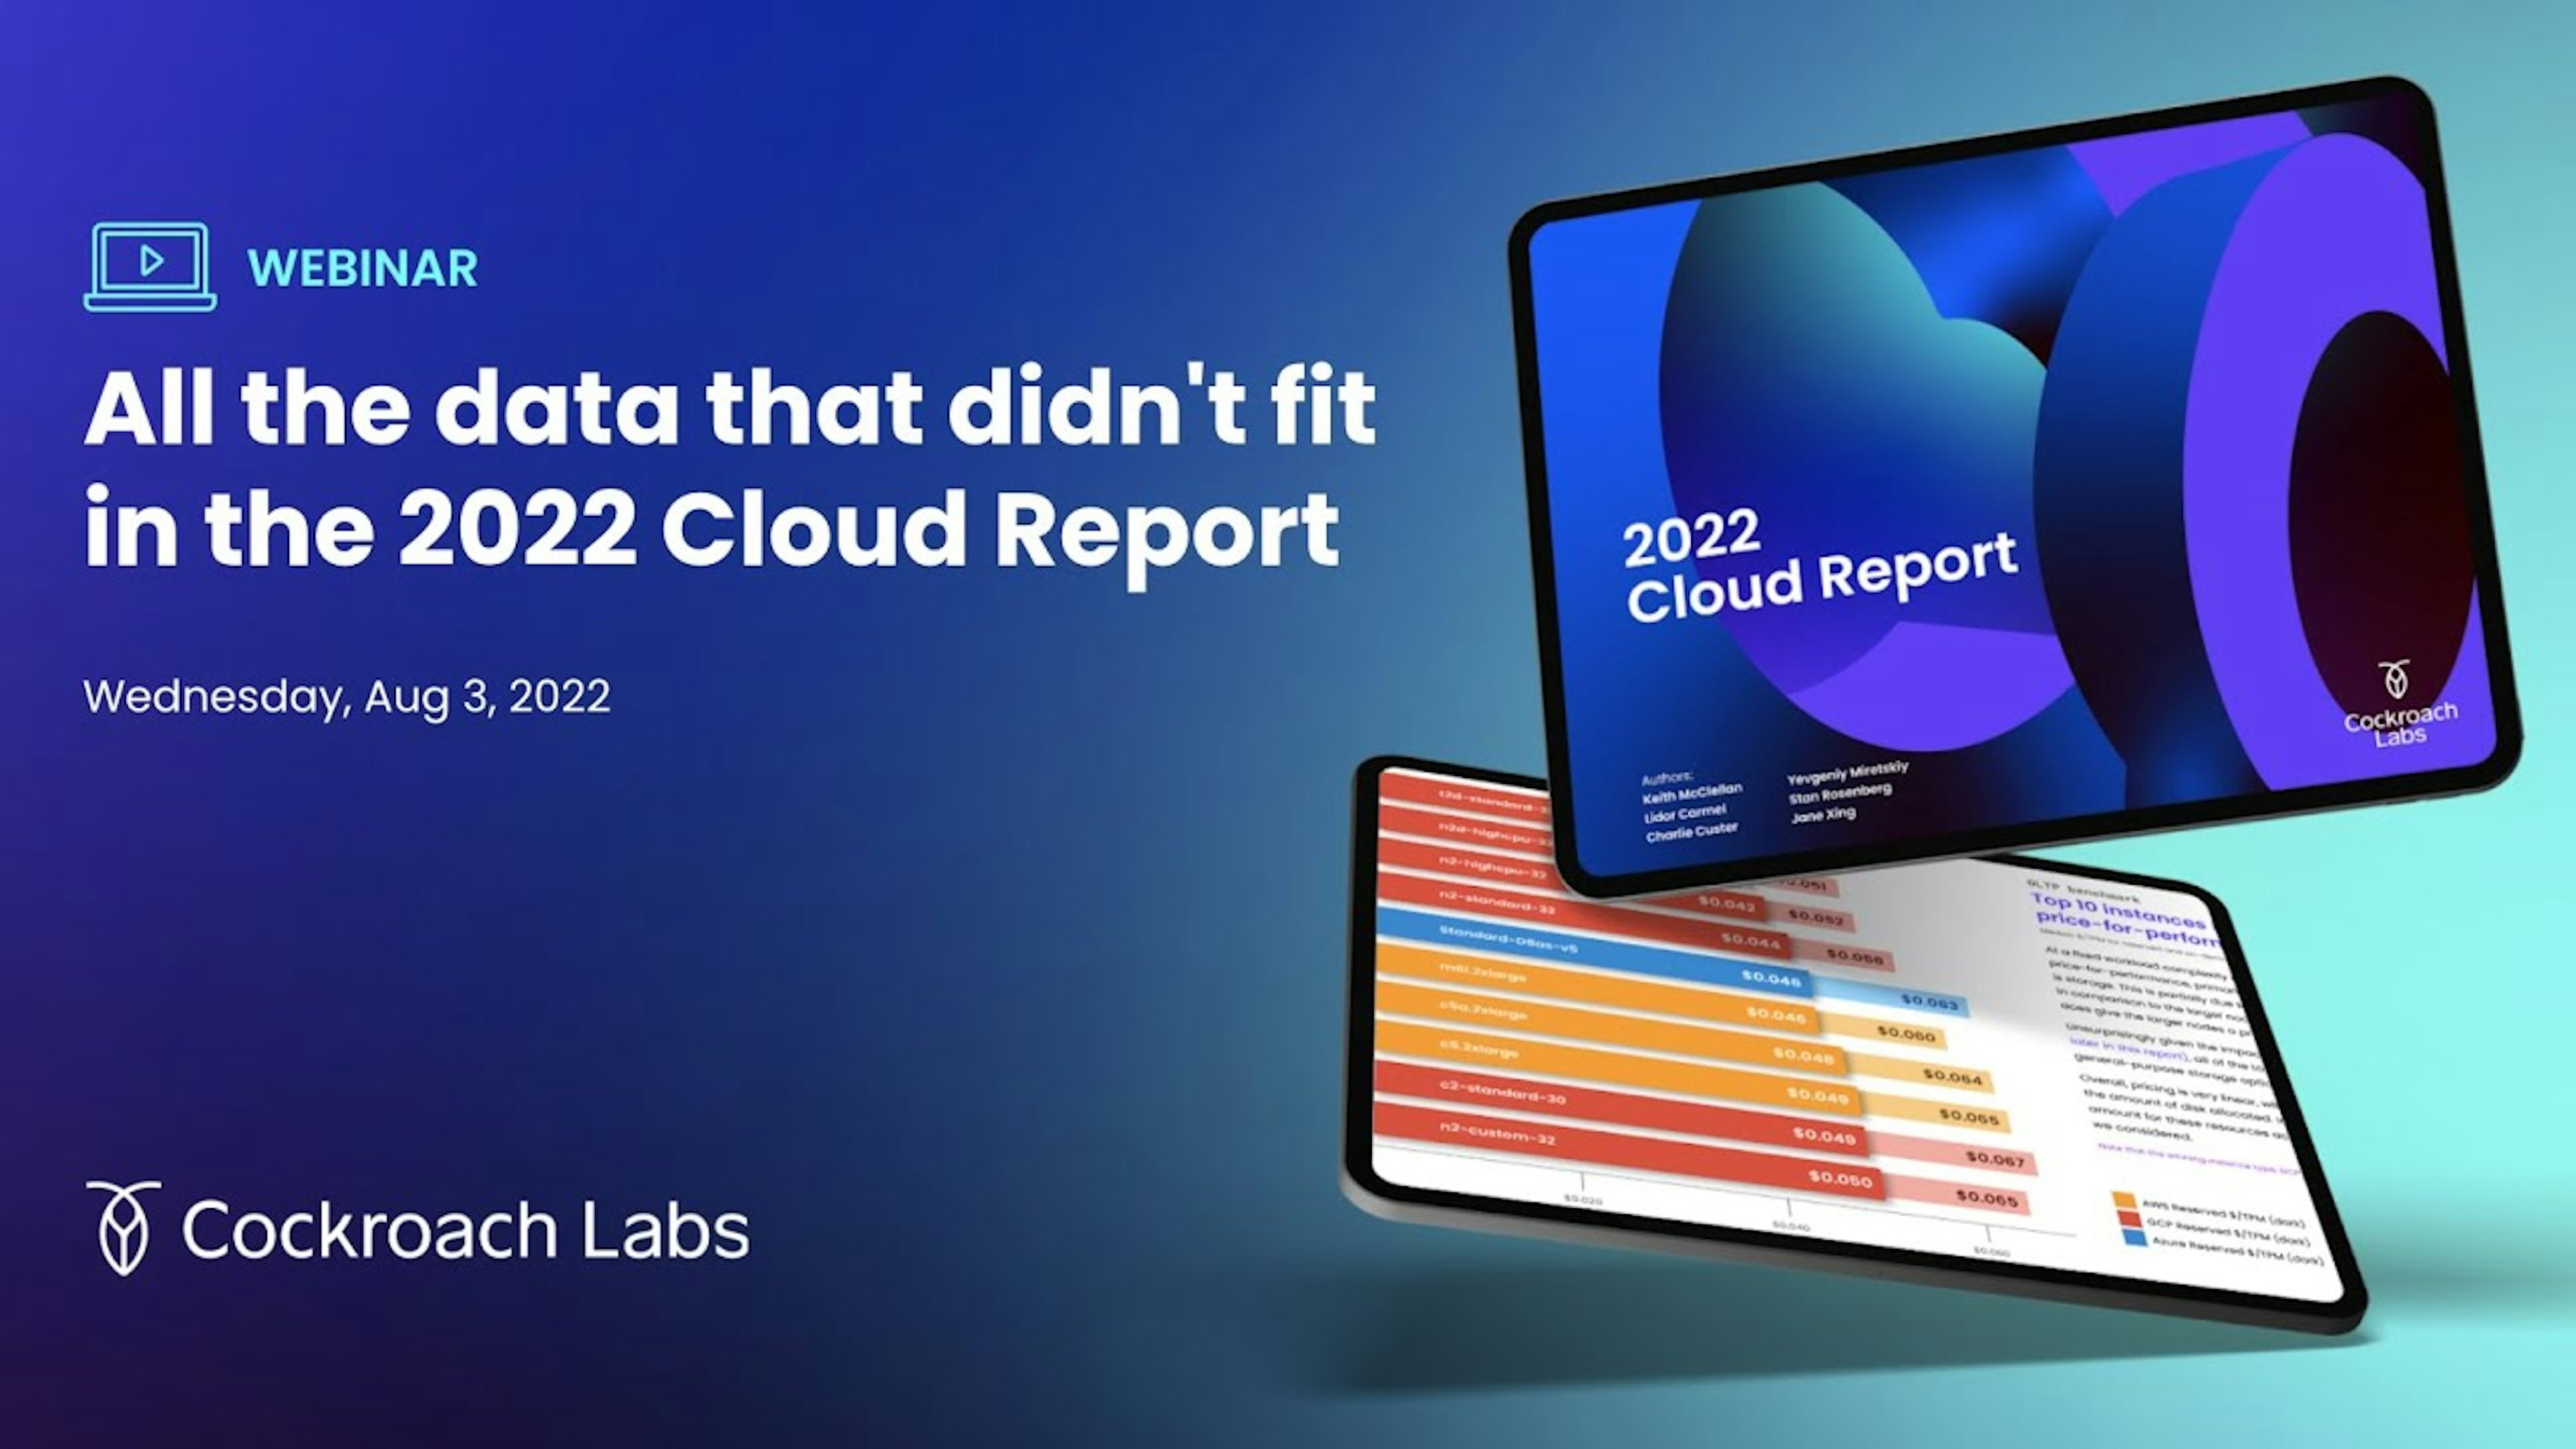 webinar-all-the-data-that-didnt-fit-in-the-2022-cloud-report